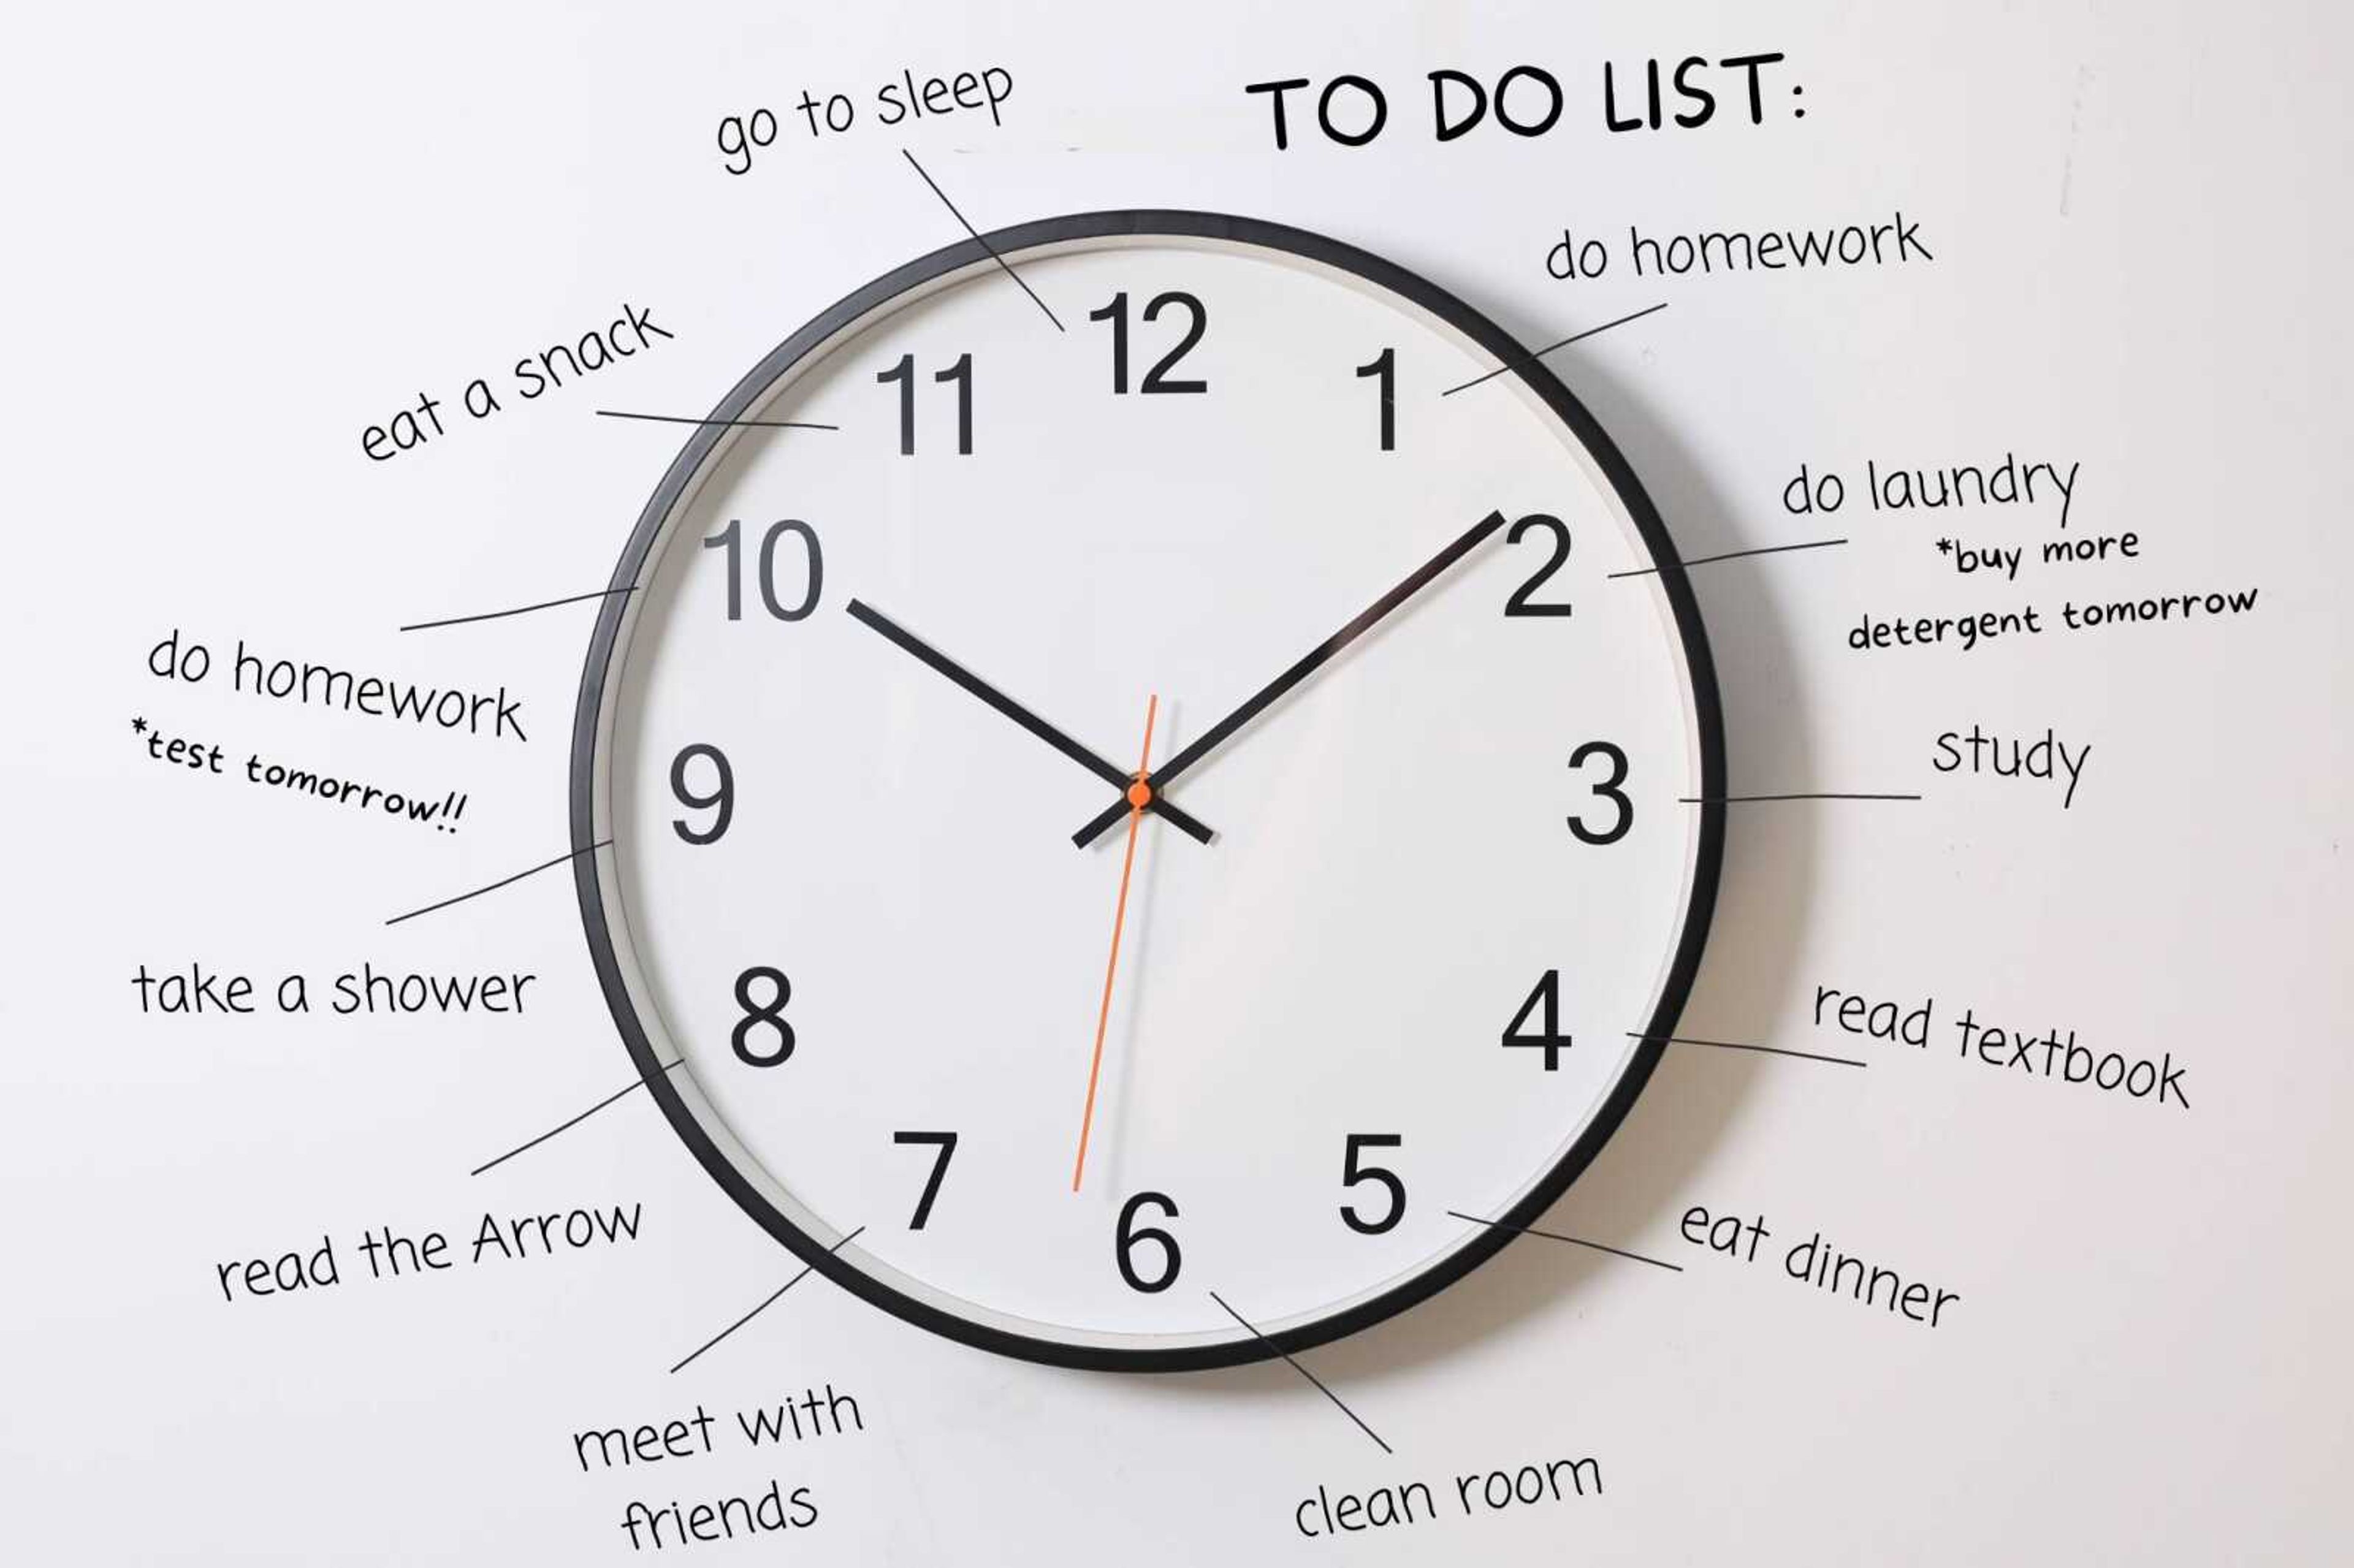 A college student’s guide to getting a hectic schedule under control